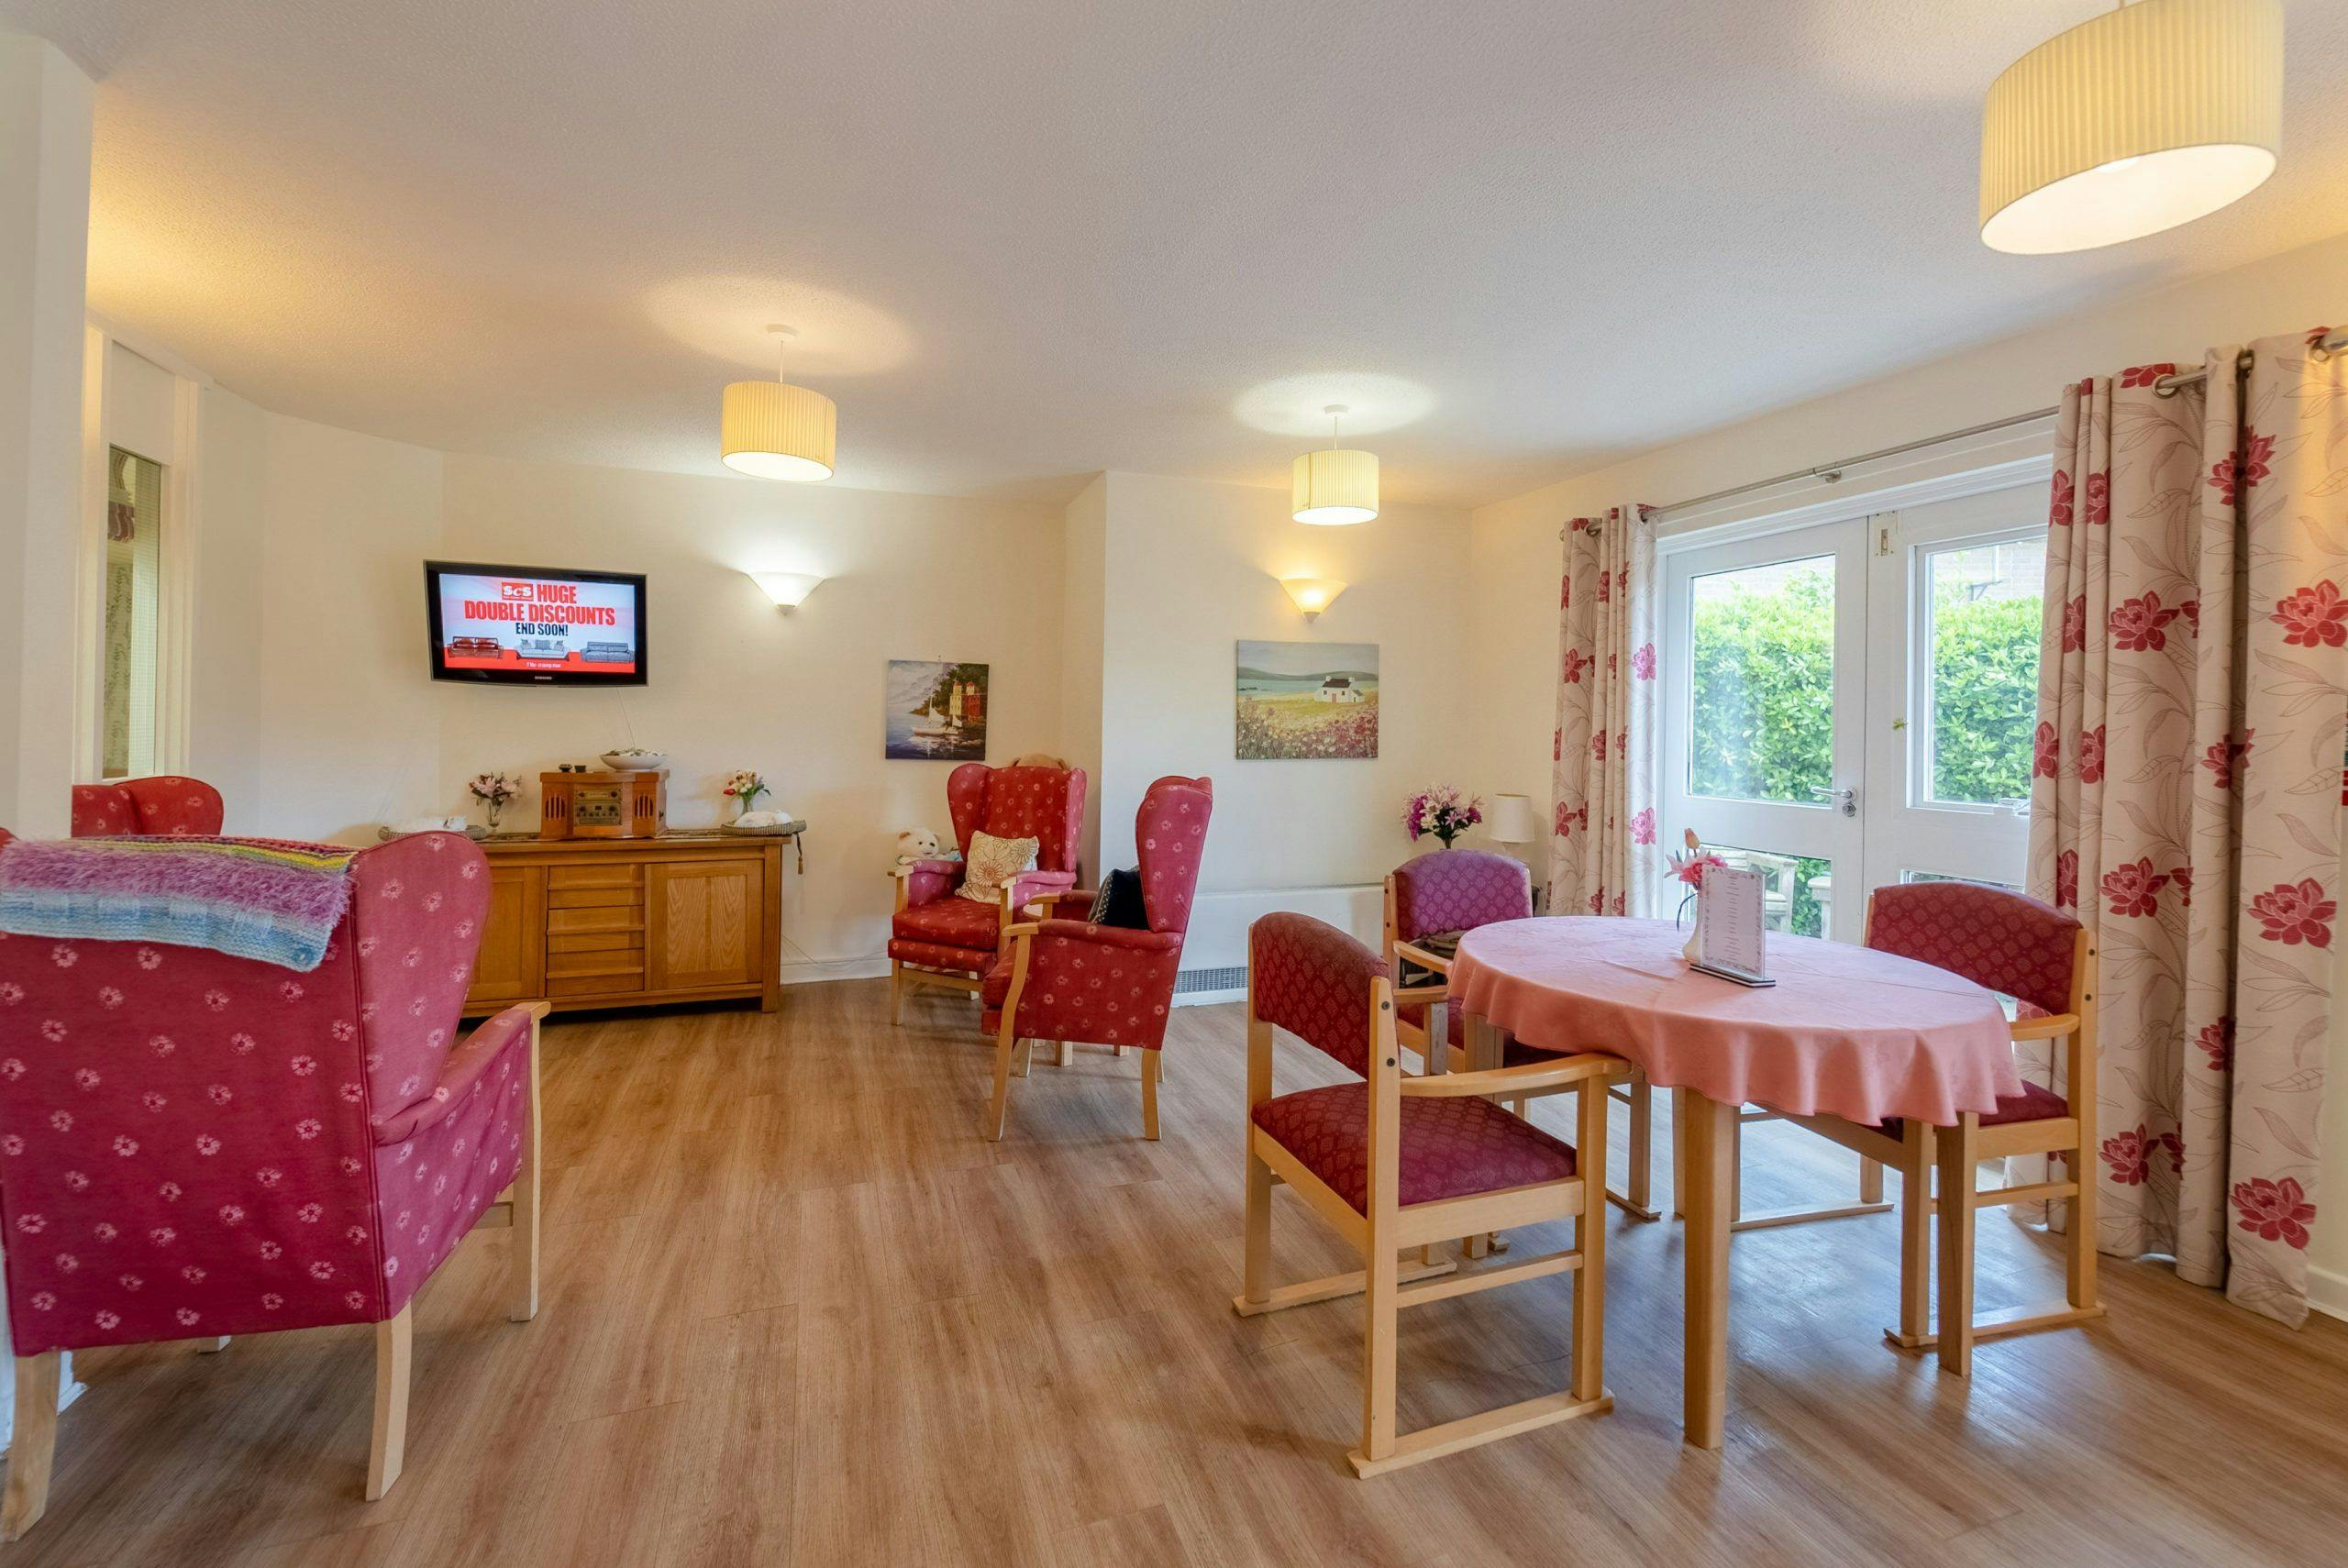 Lounge/dining area of Vera James House care home in Ely, Cambridgeshire